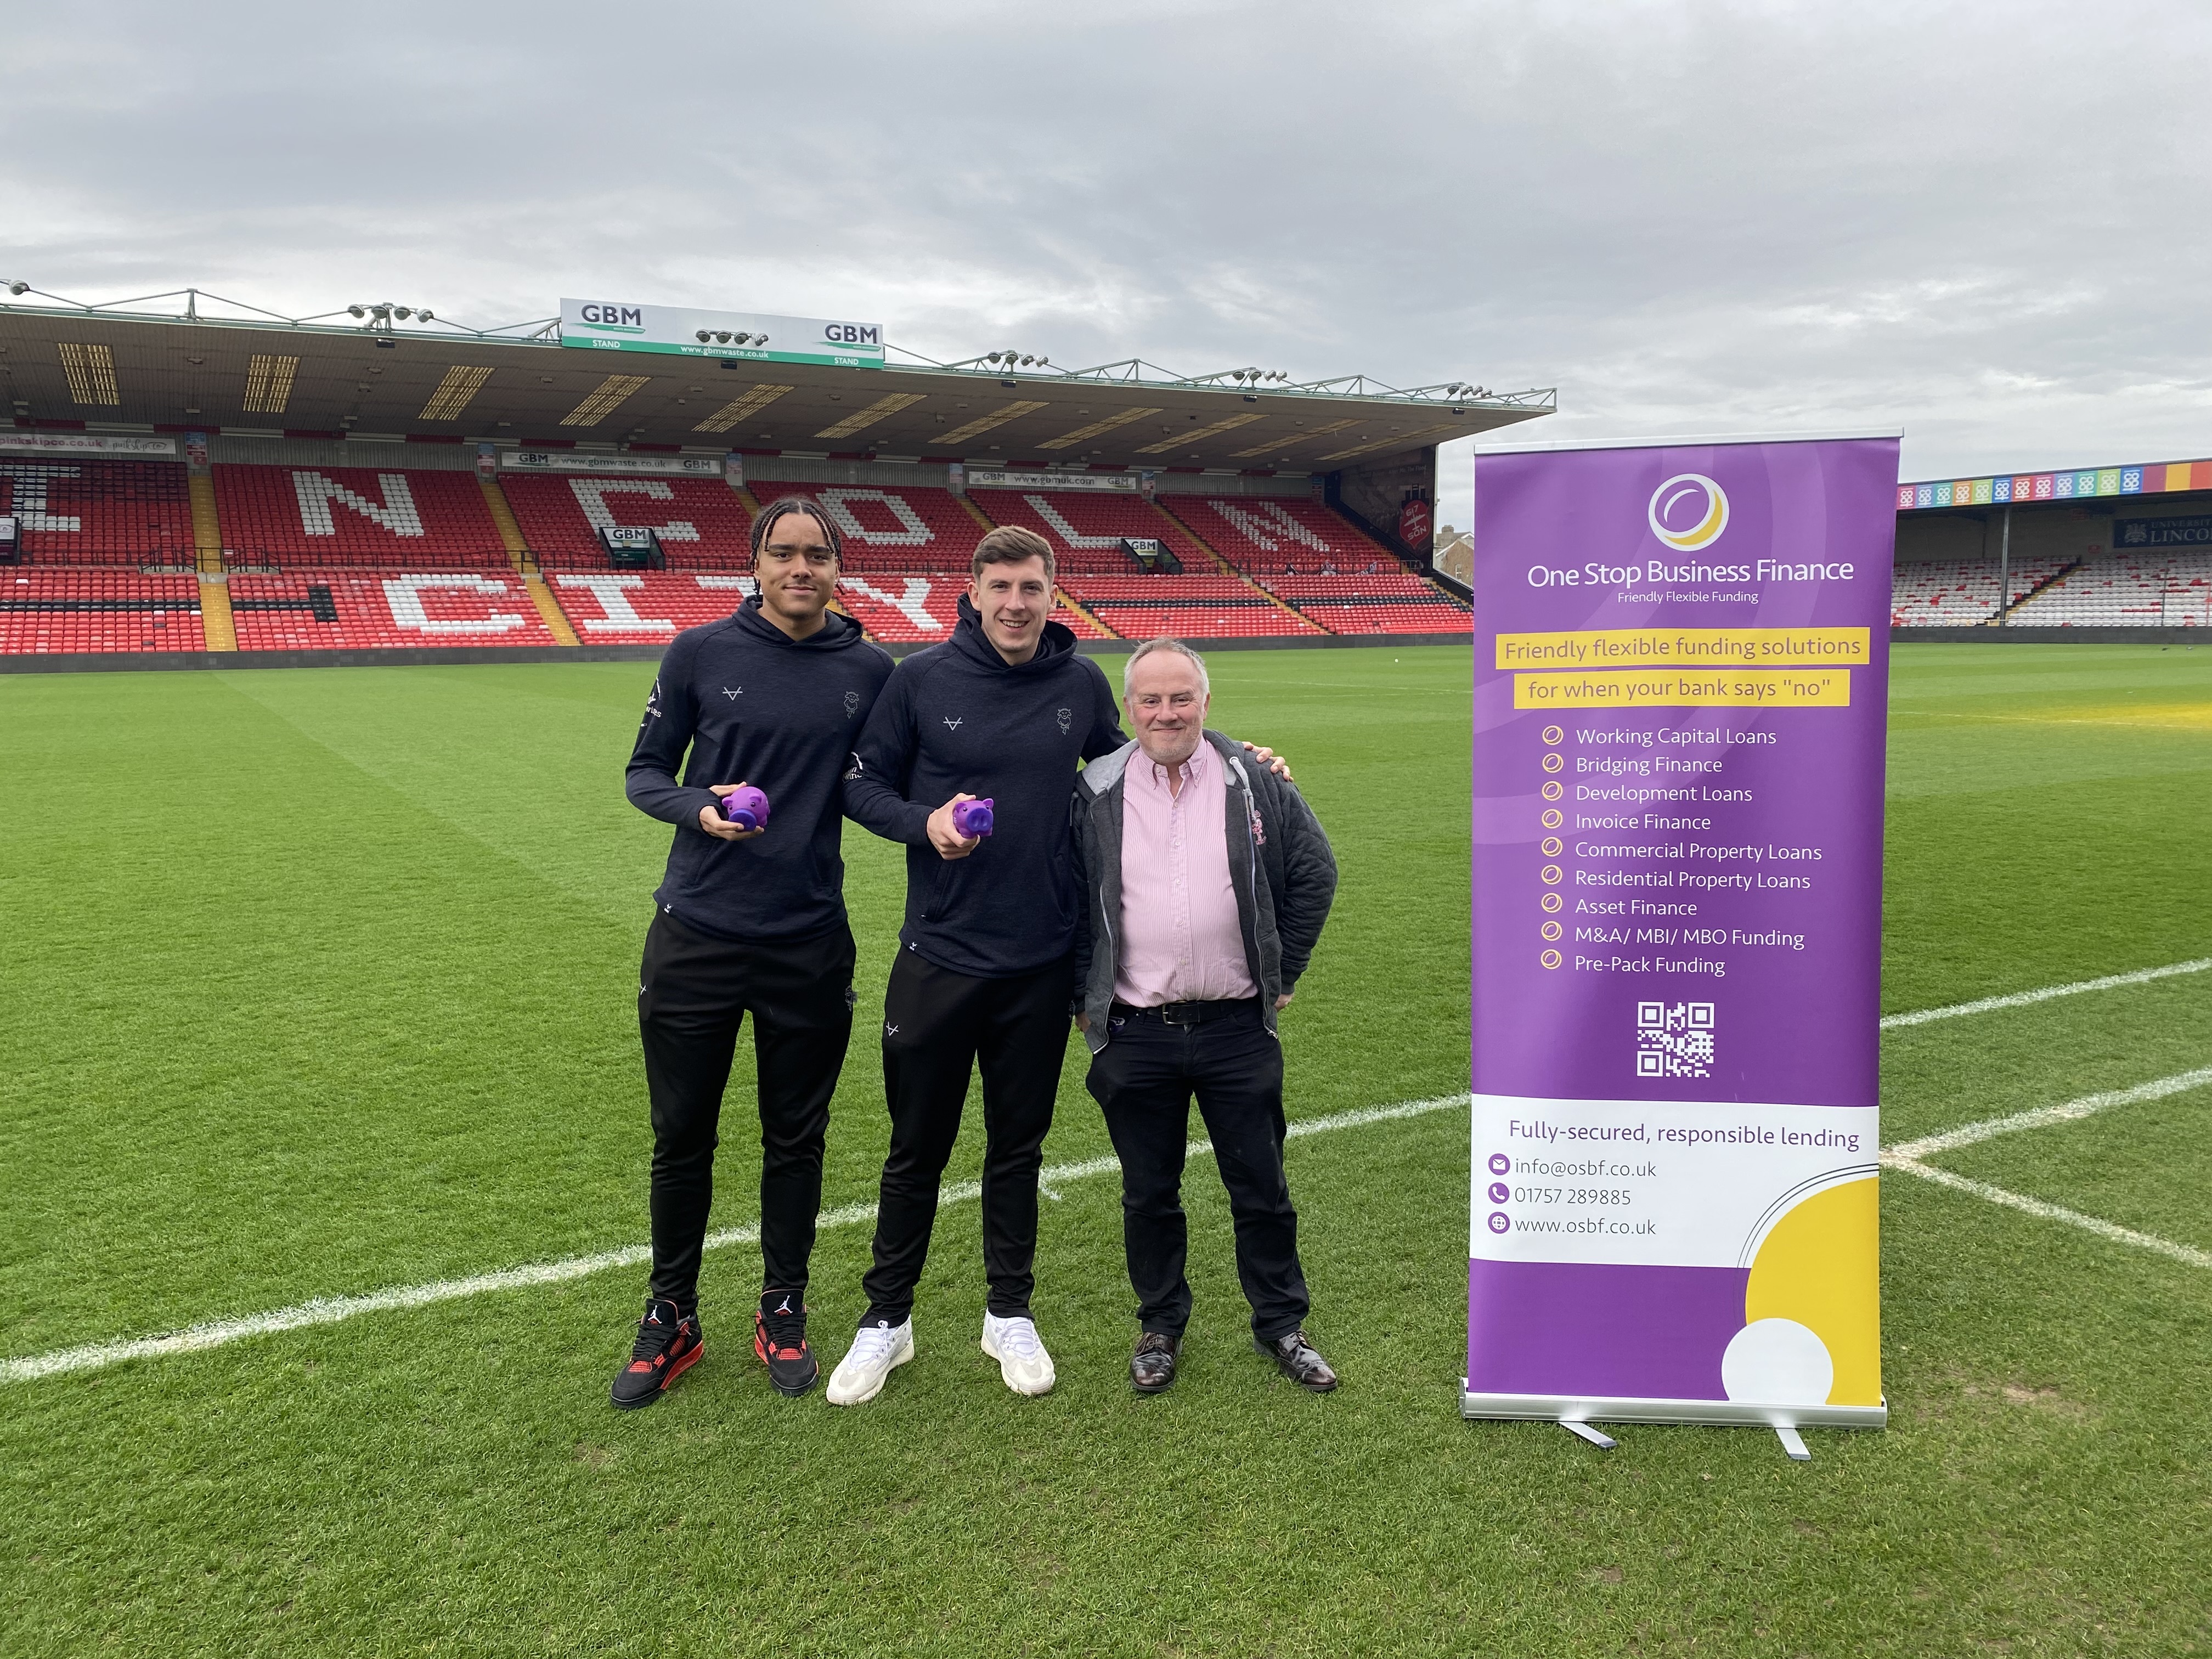 One Stop Business Finance teams up with Lincoln City Football Club